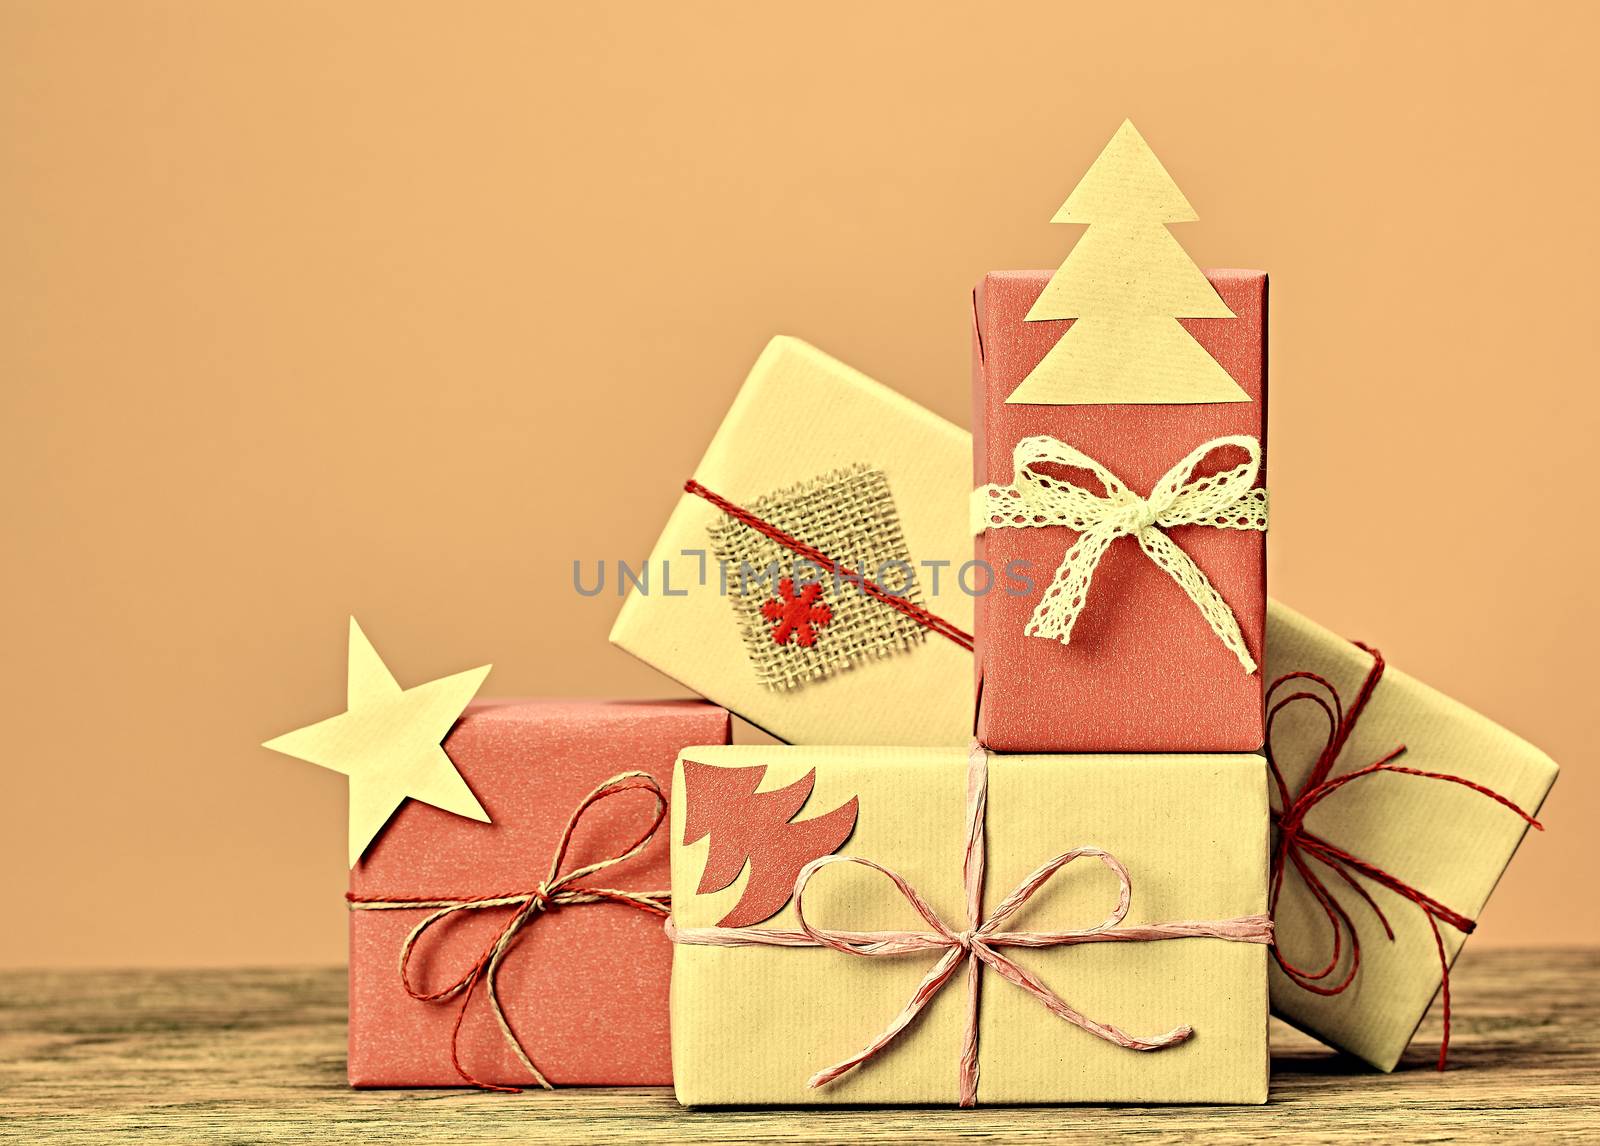 Gift boxes, Christmas decorations. Star, fir tree made paper. Greeting card, handmade, closeup